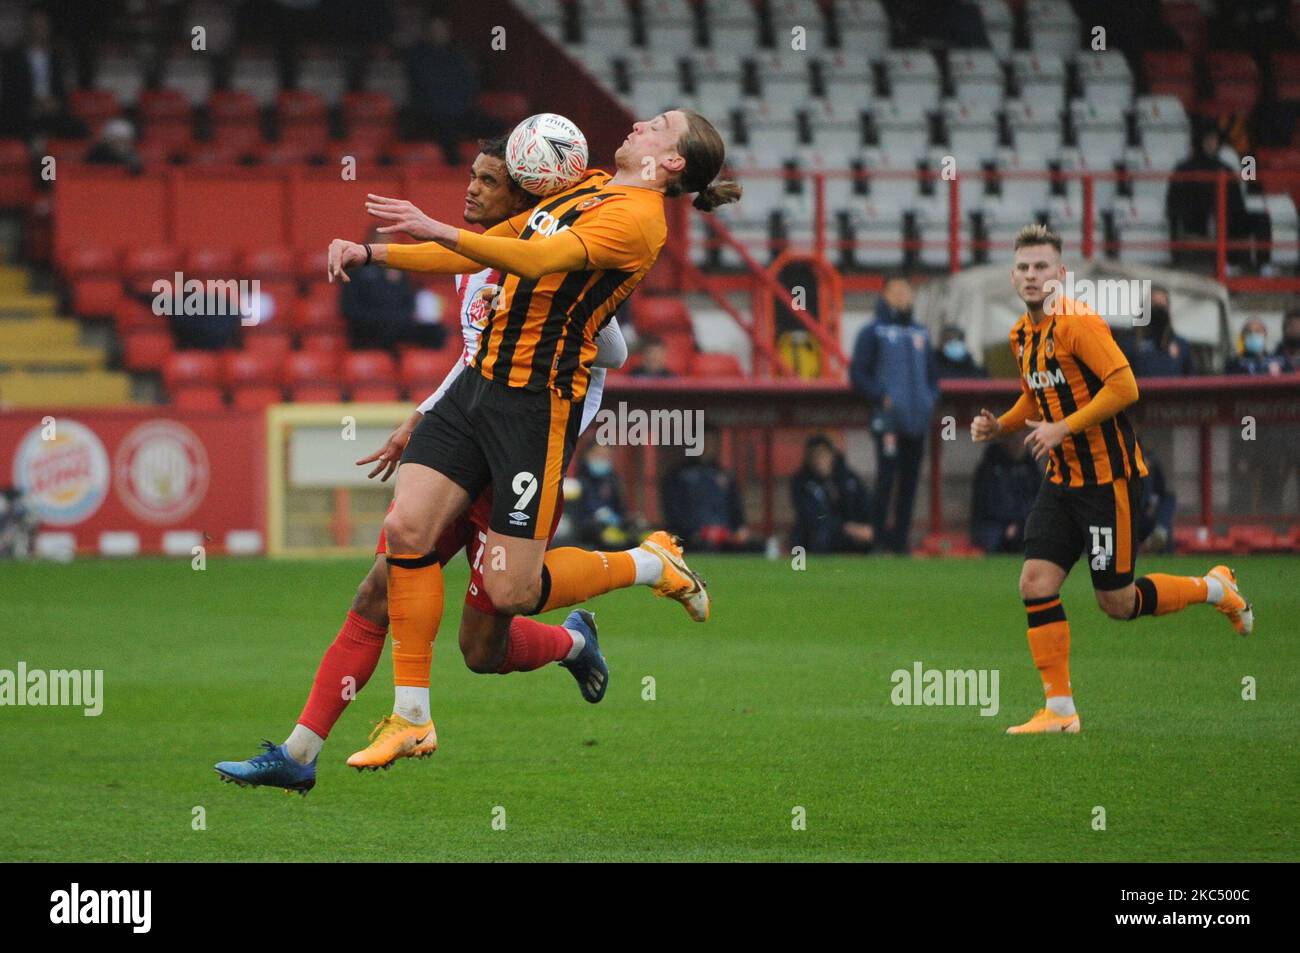 Hull Citys Tom Eaves controls the ball while under pressure from Stevenages Terence Vancooten during the FA Cup match between Stevenage and Hull City at the Lamex Stadium, Stevenage on Sunday 29th November 2020. (Photo by Ben Pooley/MI News/NurPhoto) Stock Photo